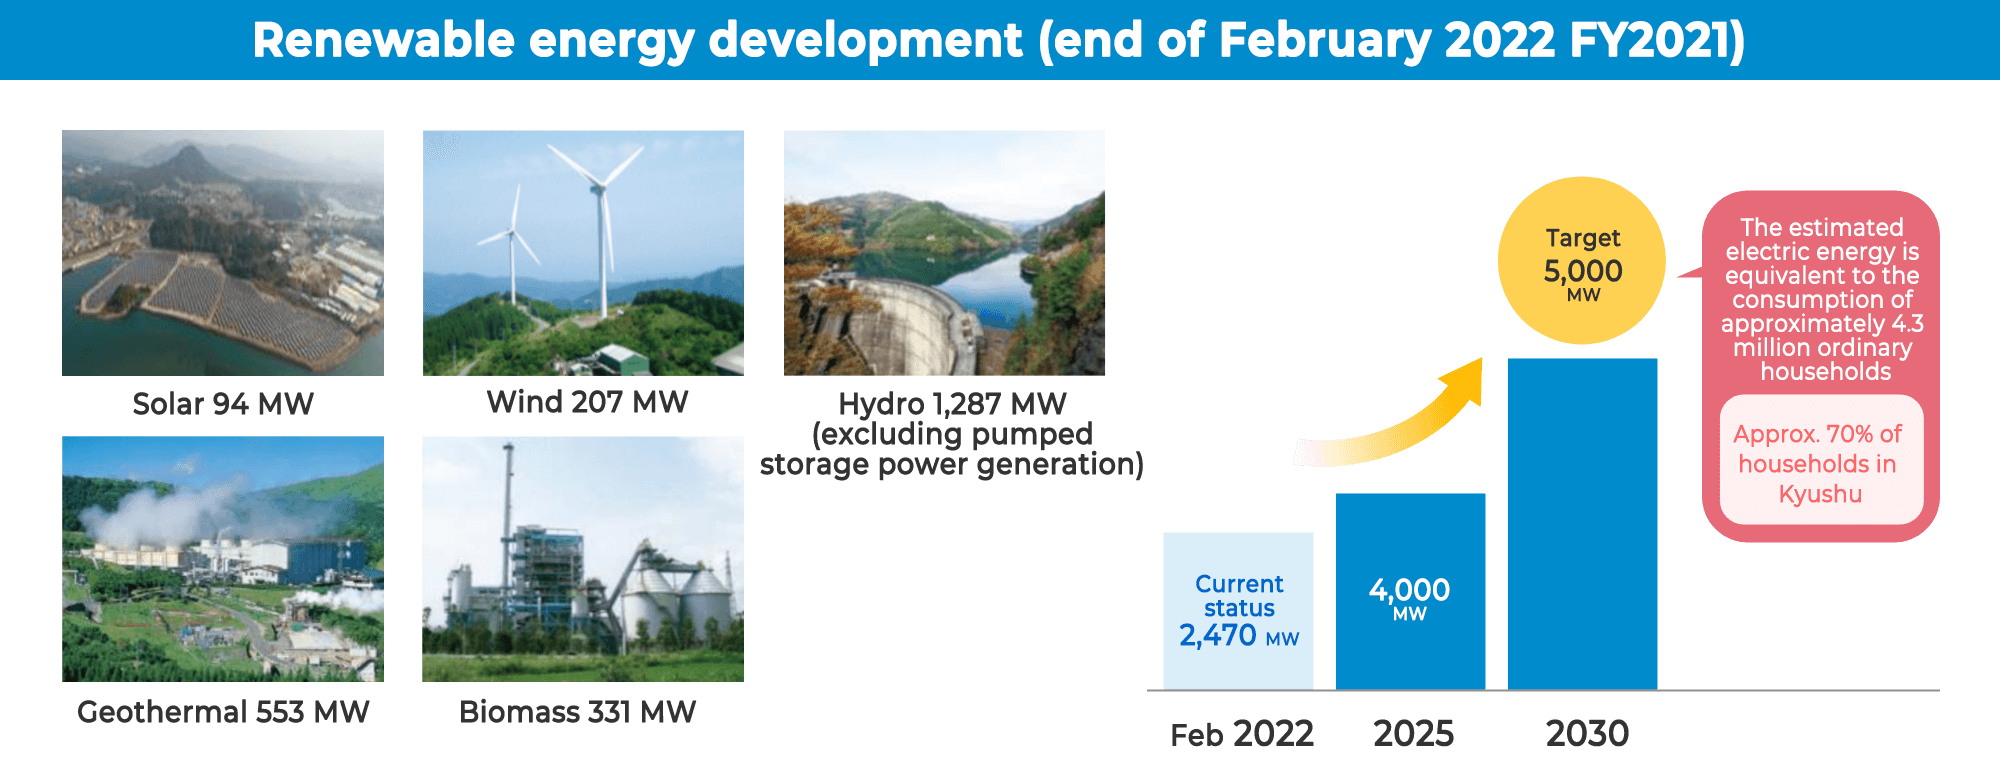 Renewable energy development (as of end of FY2020)